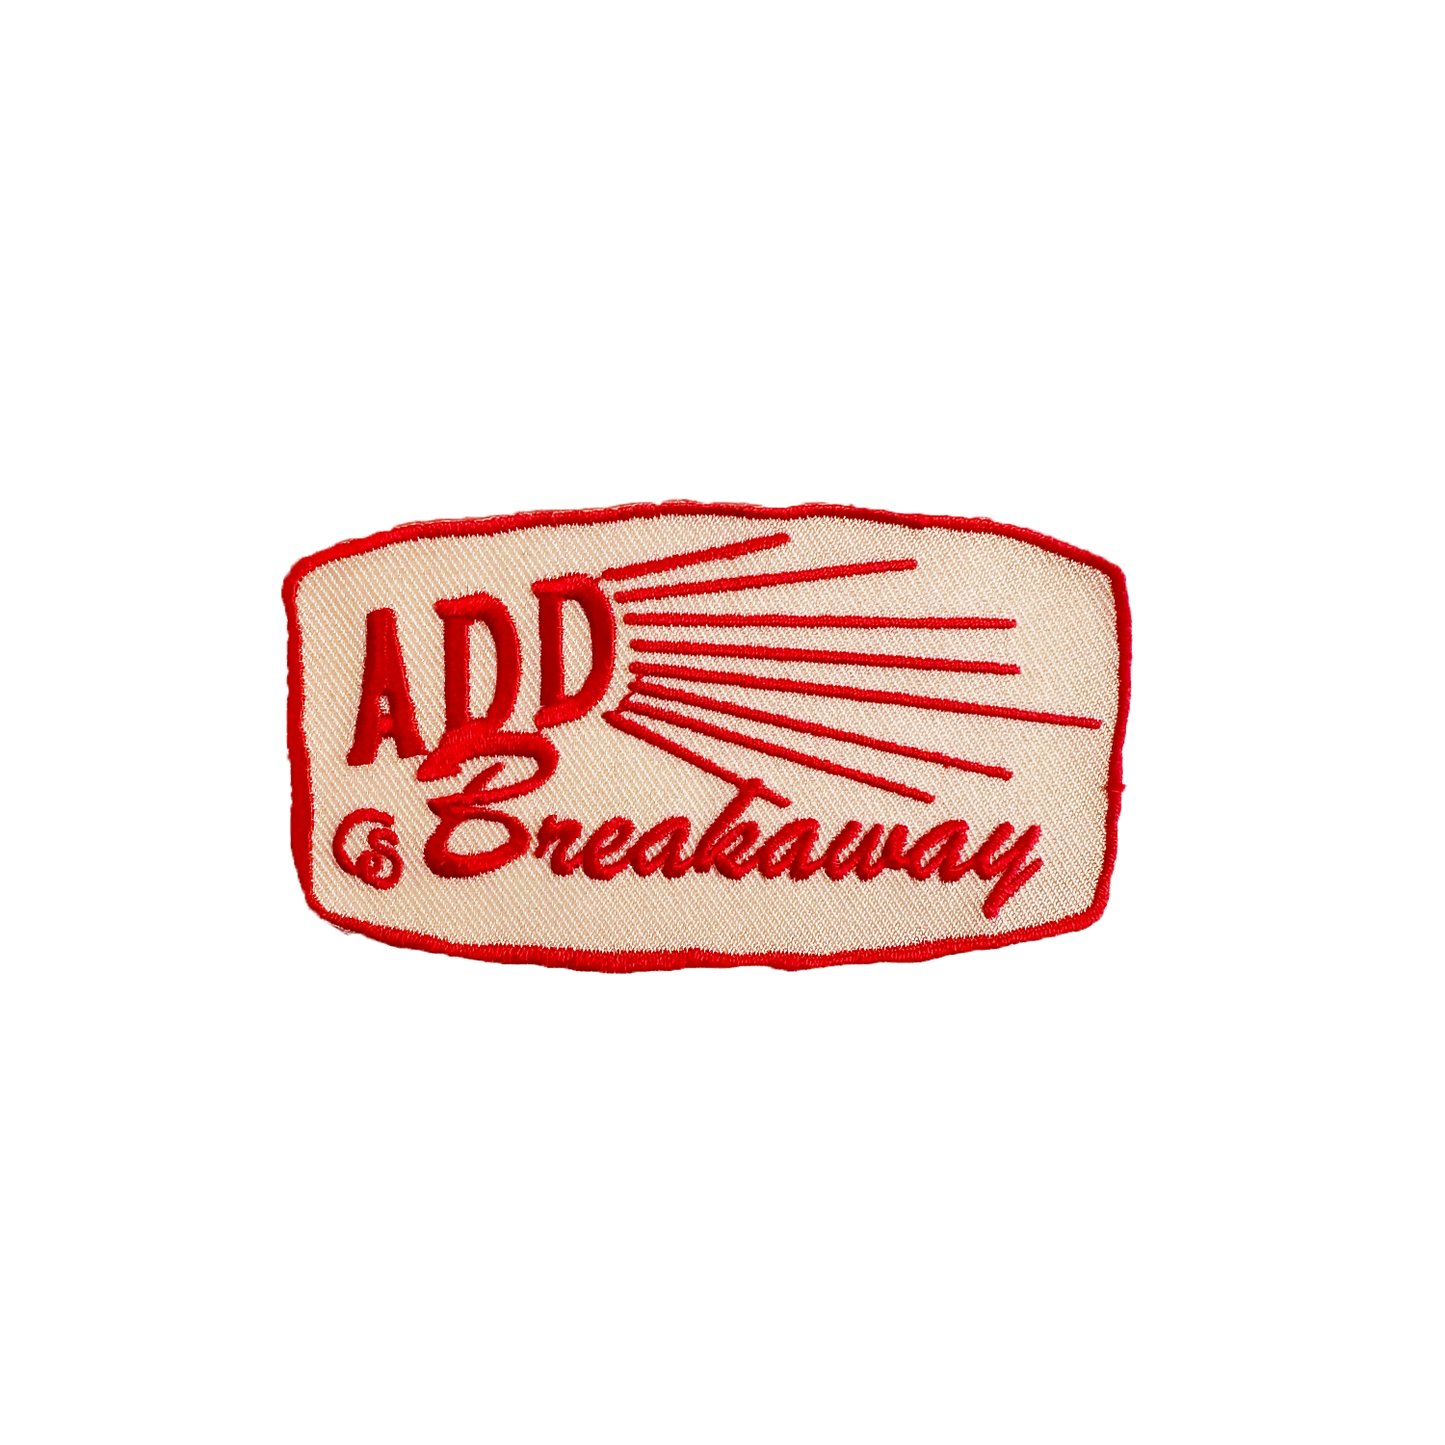 Add Breakaway Embroidered Patch